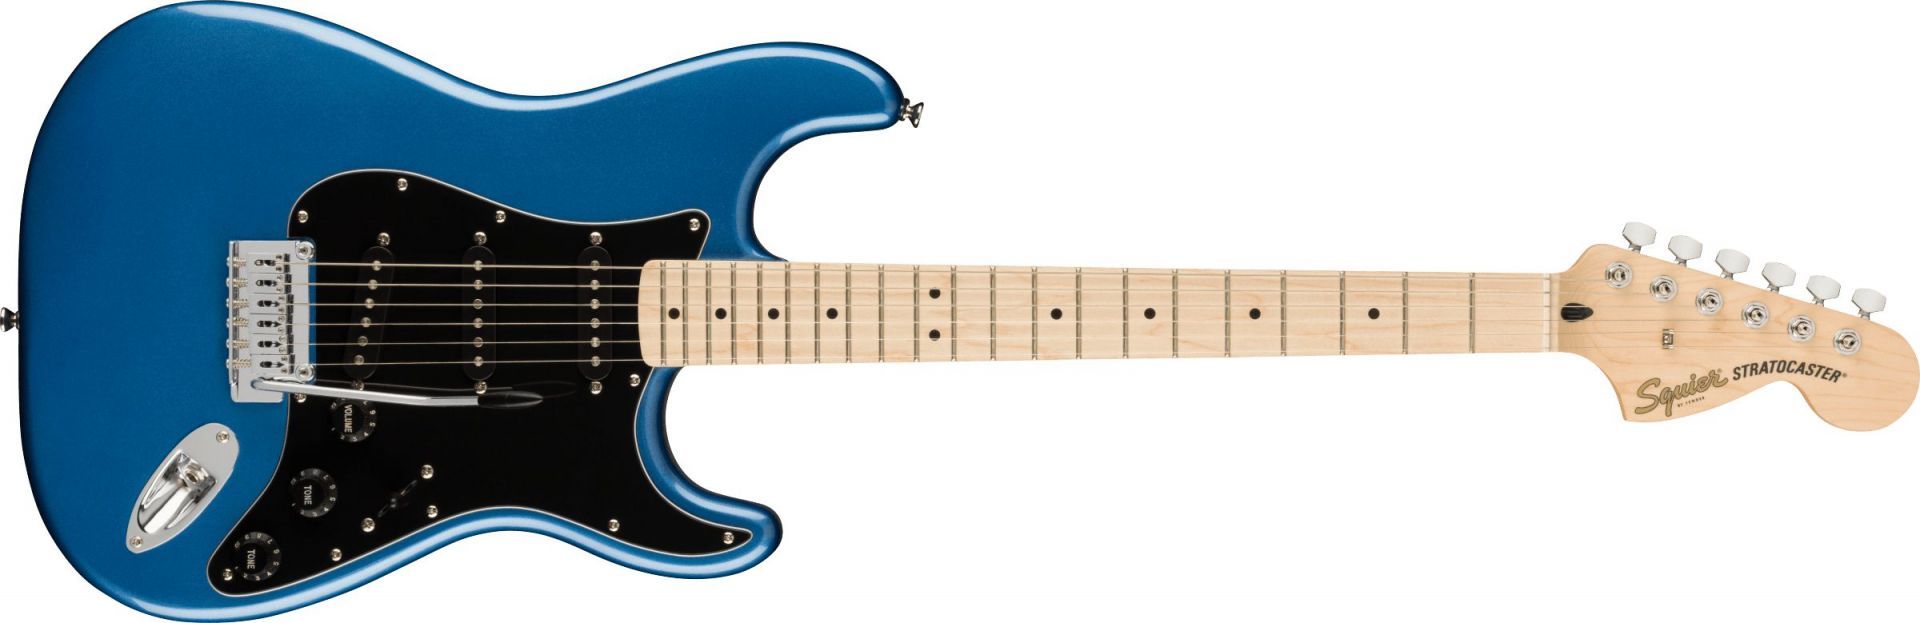 Squier Affinity Series Stratocaster Lake Placid-Blue